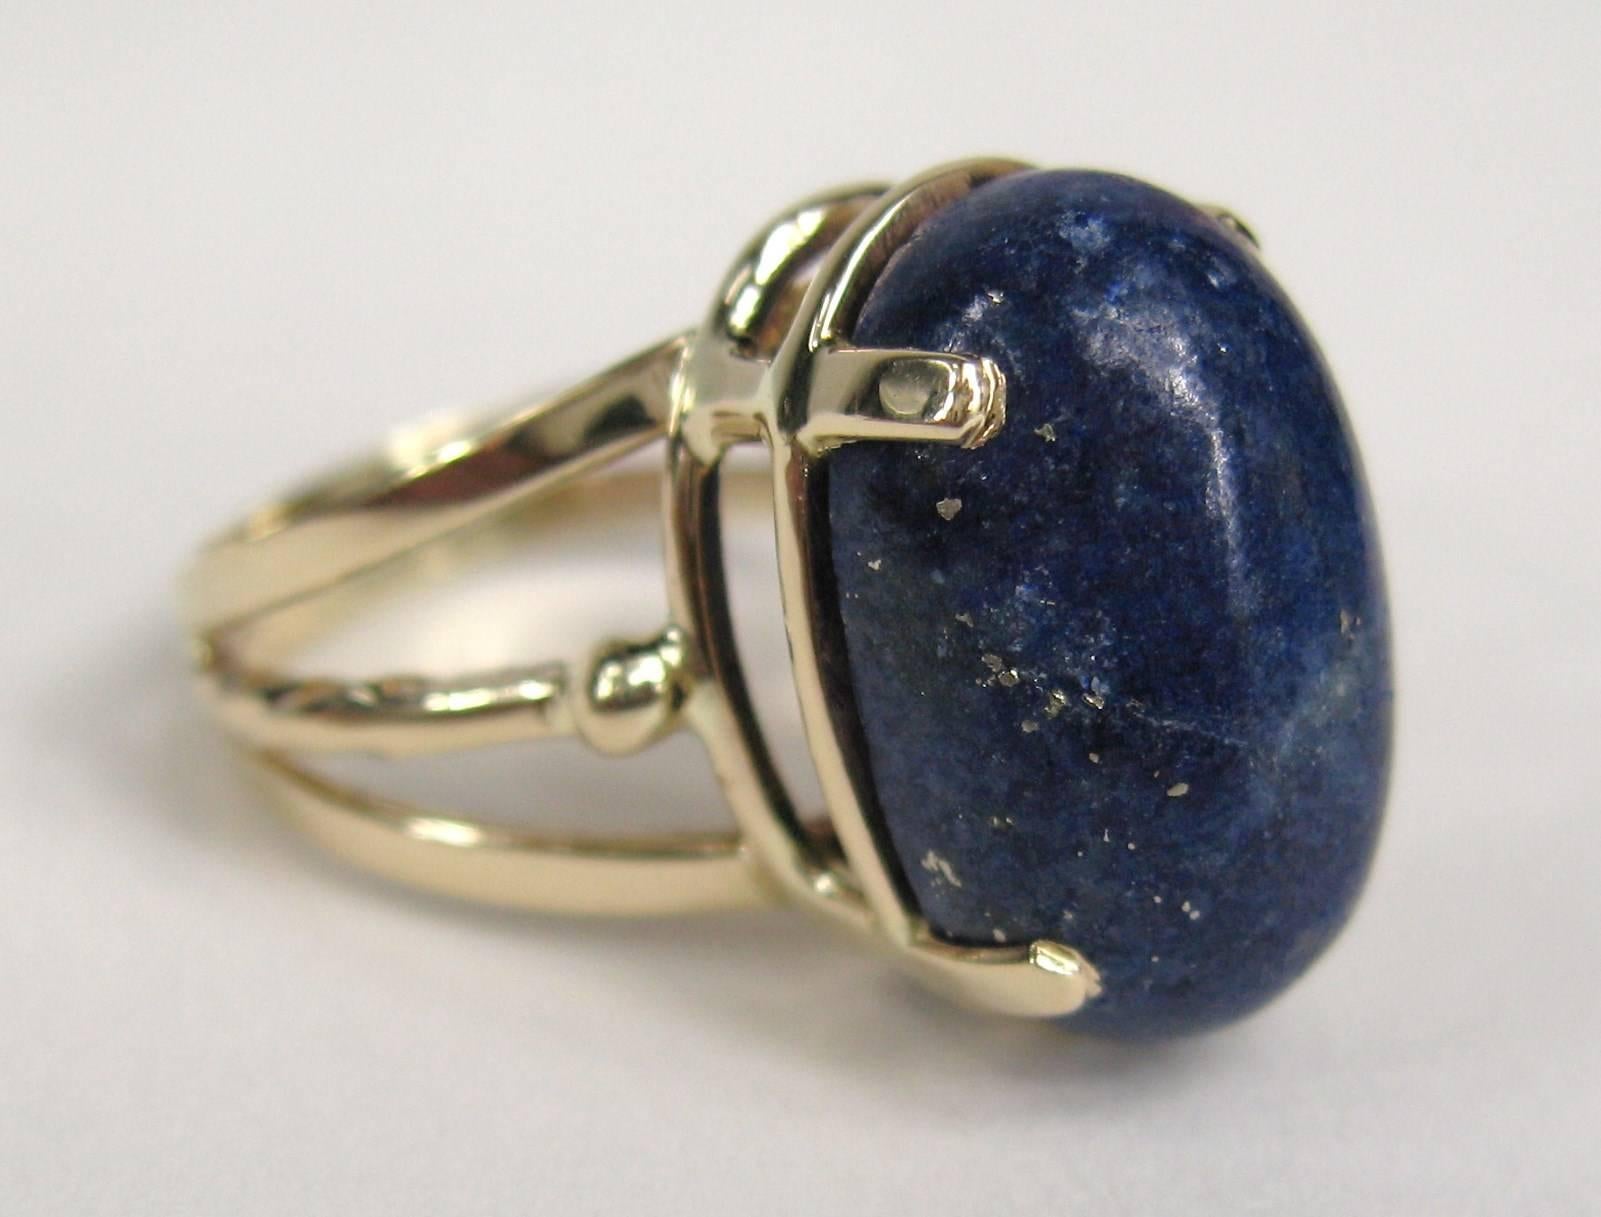 Large Lapis Lazuli set in 14K gold ring. The ring is a size 7-1/4  and can be sized by us or your jeweler. The size of the lapis is approximately 6.69 mm x 10.80 mm. This sits up .50 in on your finger. This is out of a massive collection of